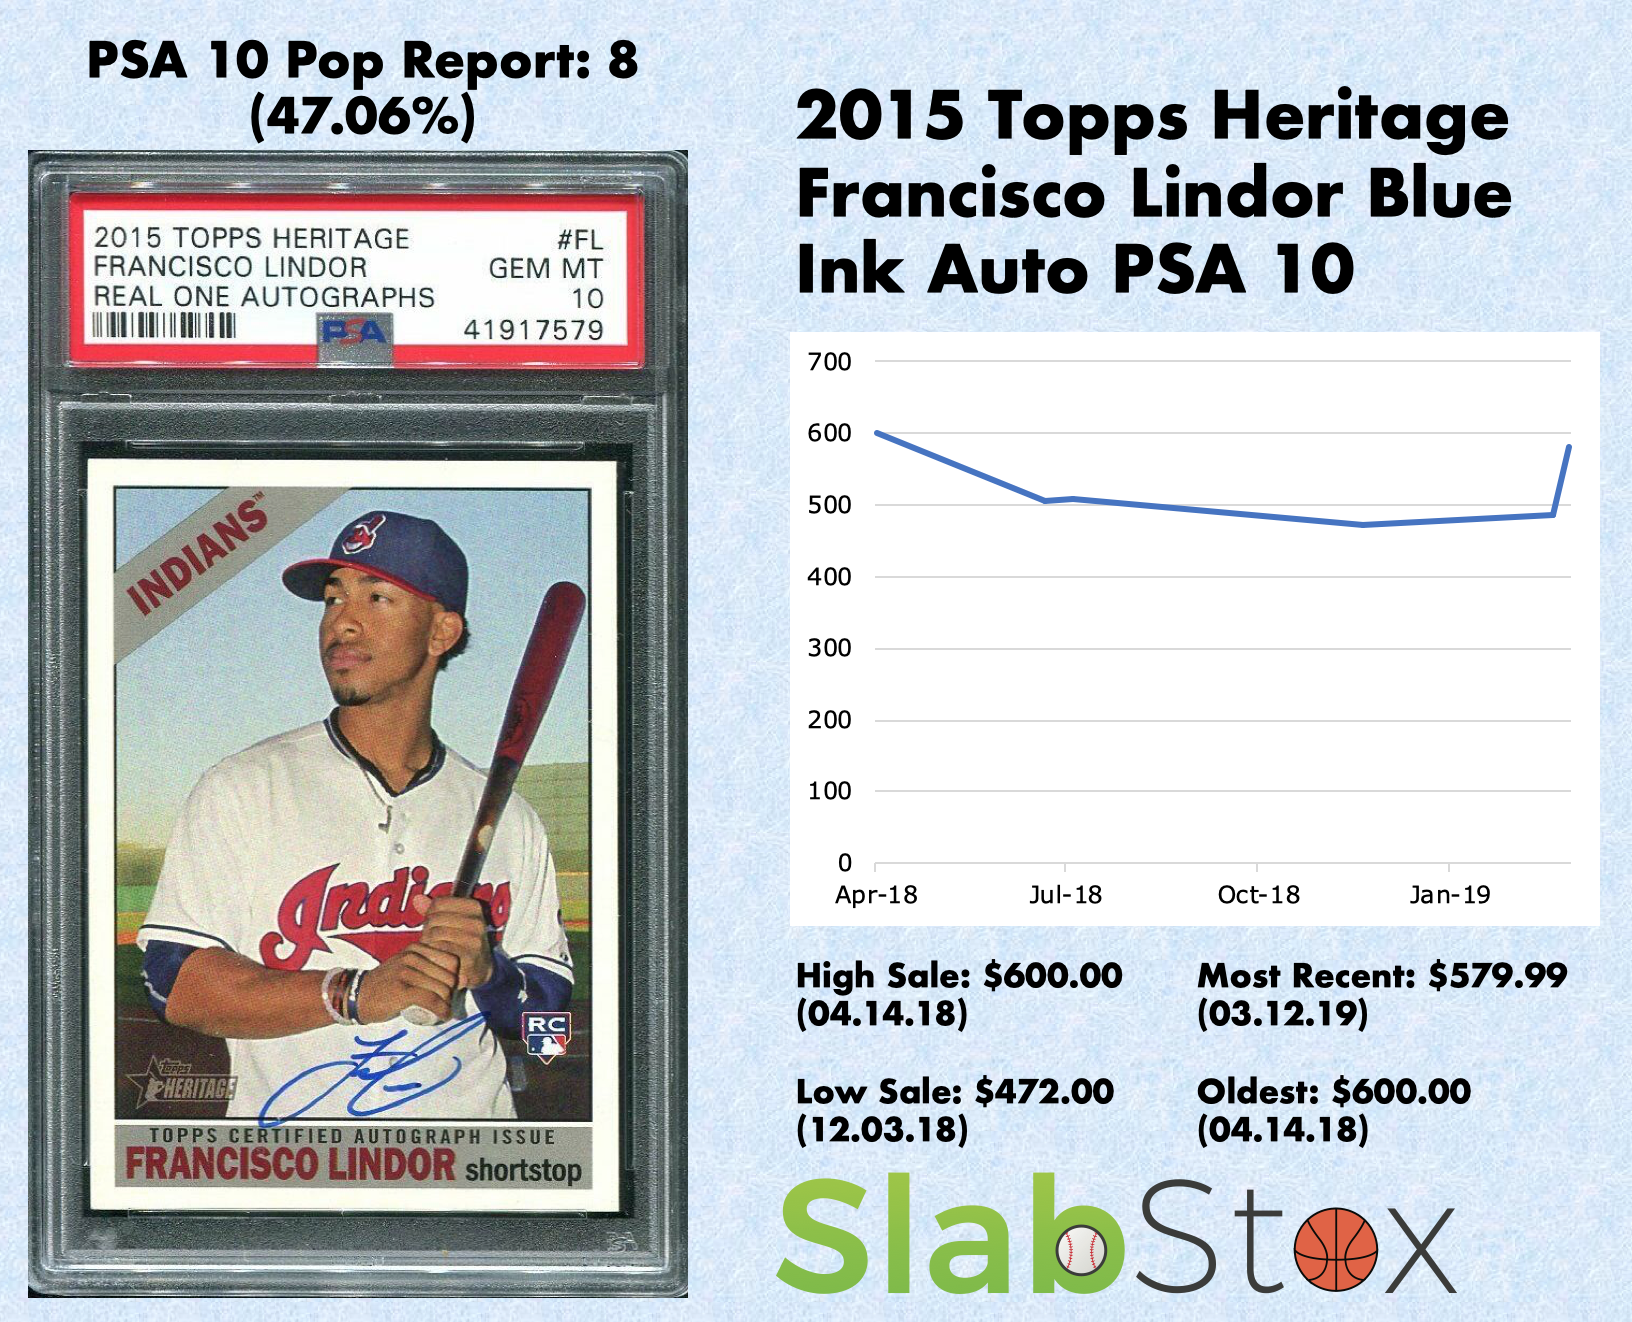 SlabStox infographic for 2015 Topps Heritage Francisco Lindor Blue Ink Auto PSA 10 sports trading card